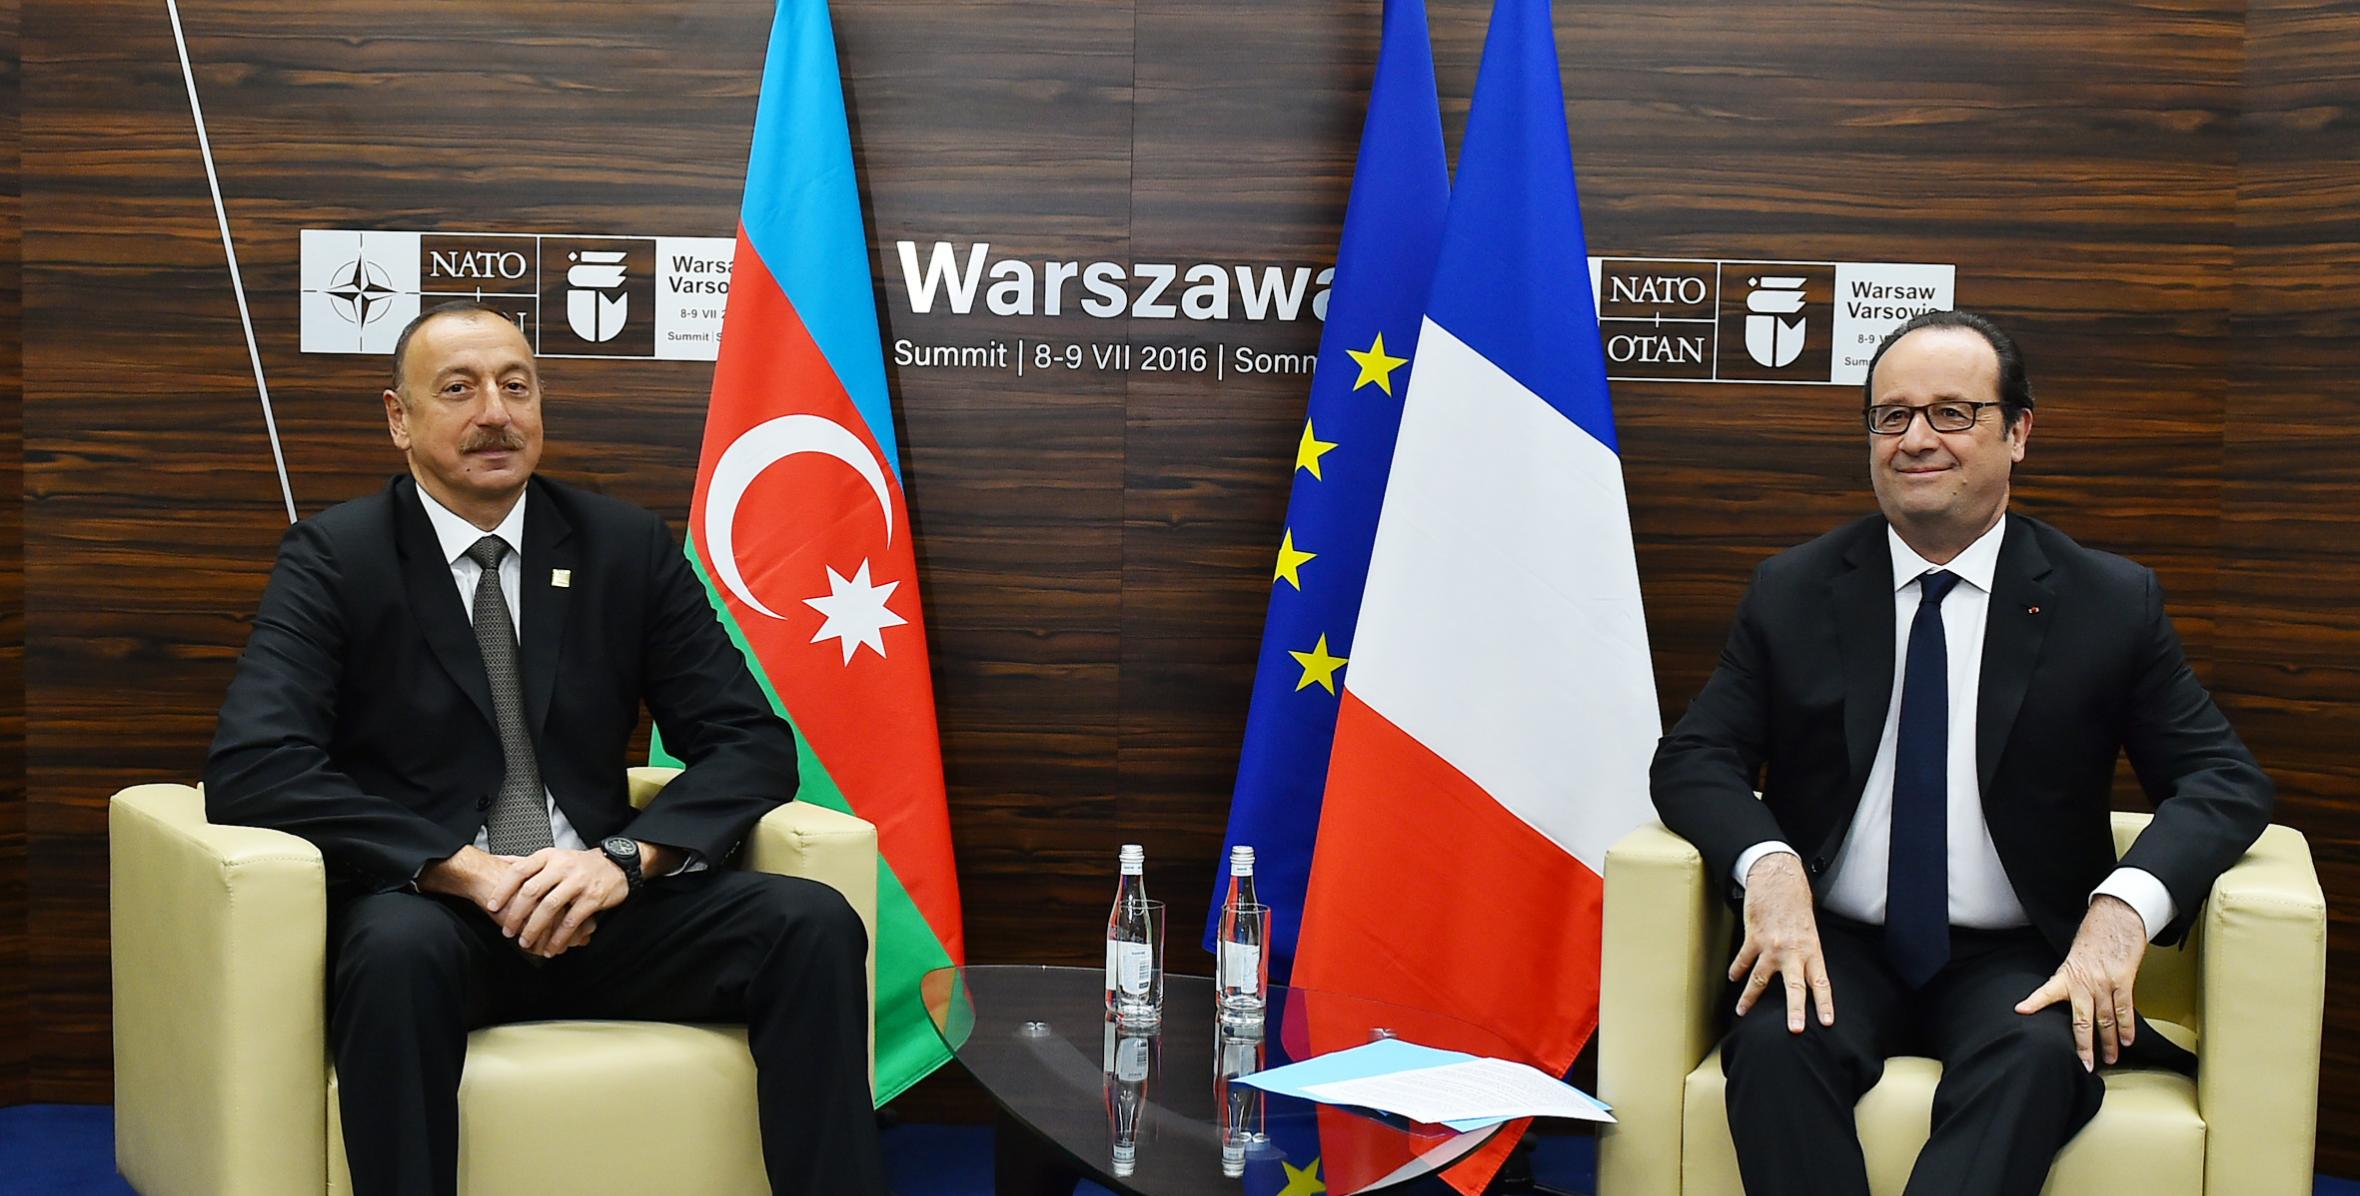 Ilham Aliyev met with French President Francois Hollande